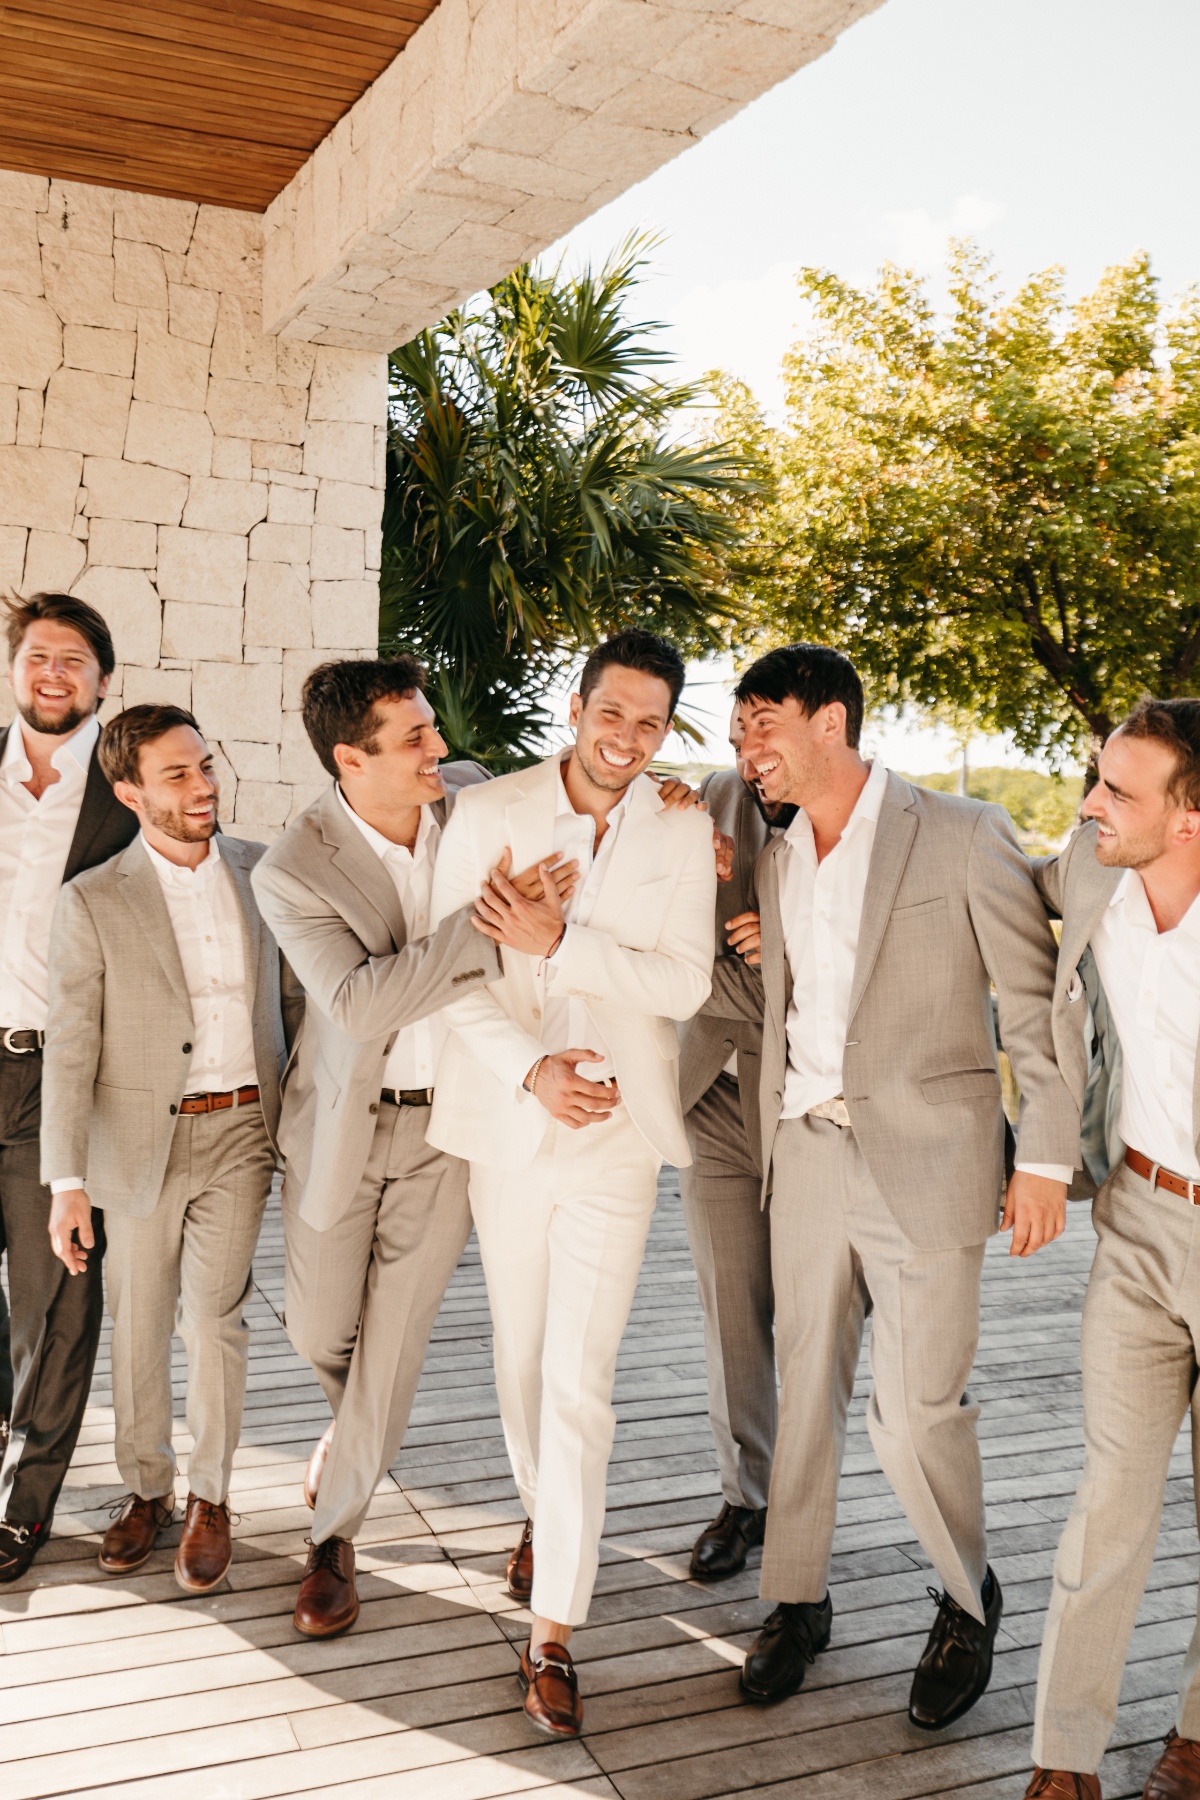 Groomsmen in linen suits with white shirts and brown shoes